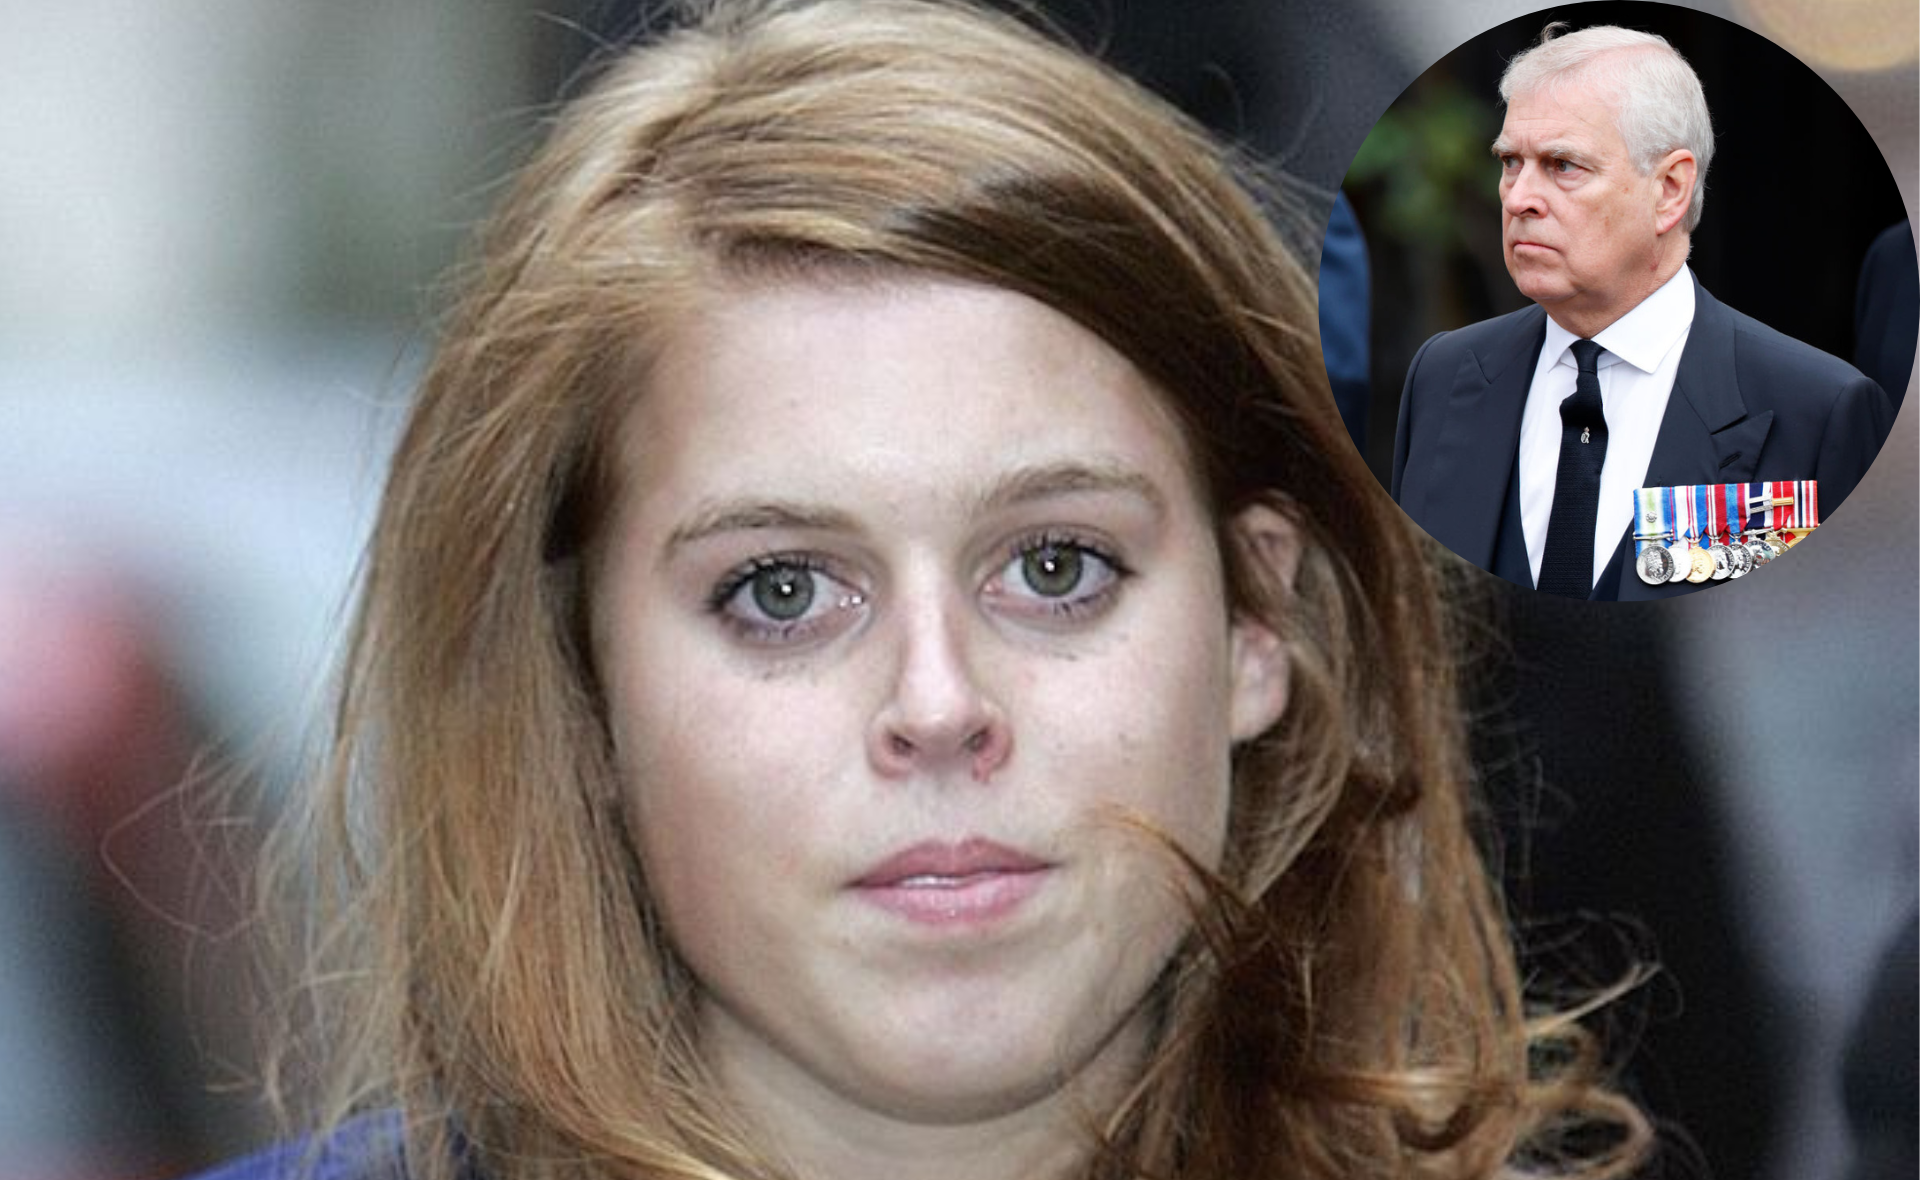 Princess Beatrice has fled London after being destroyed by her dad, Prince Andrew